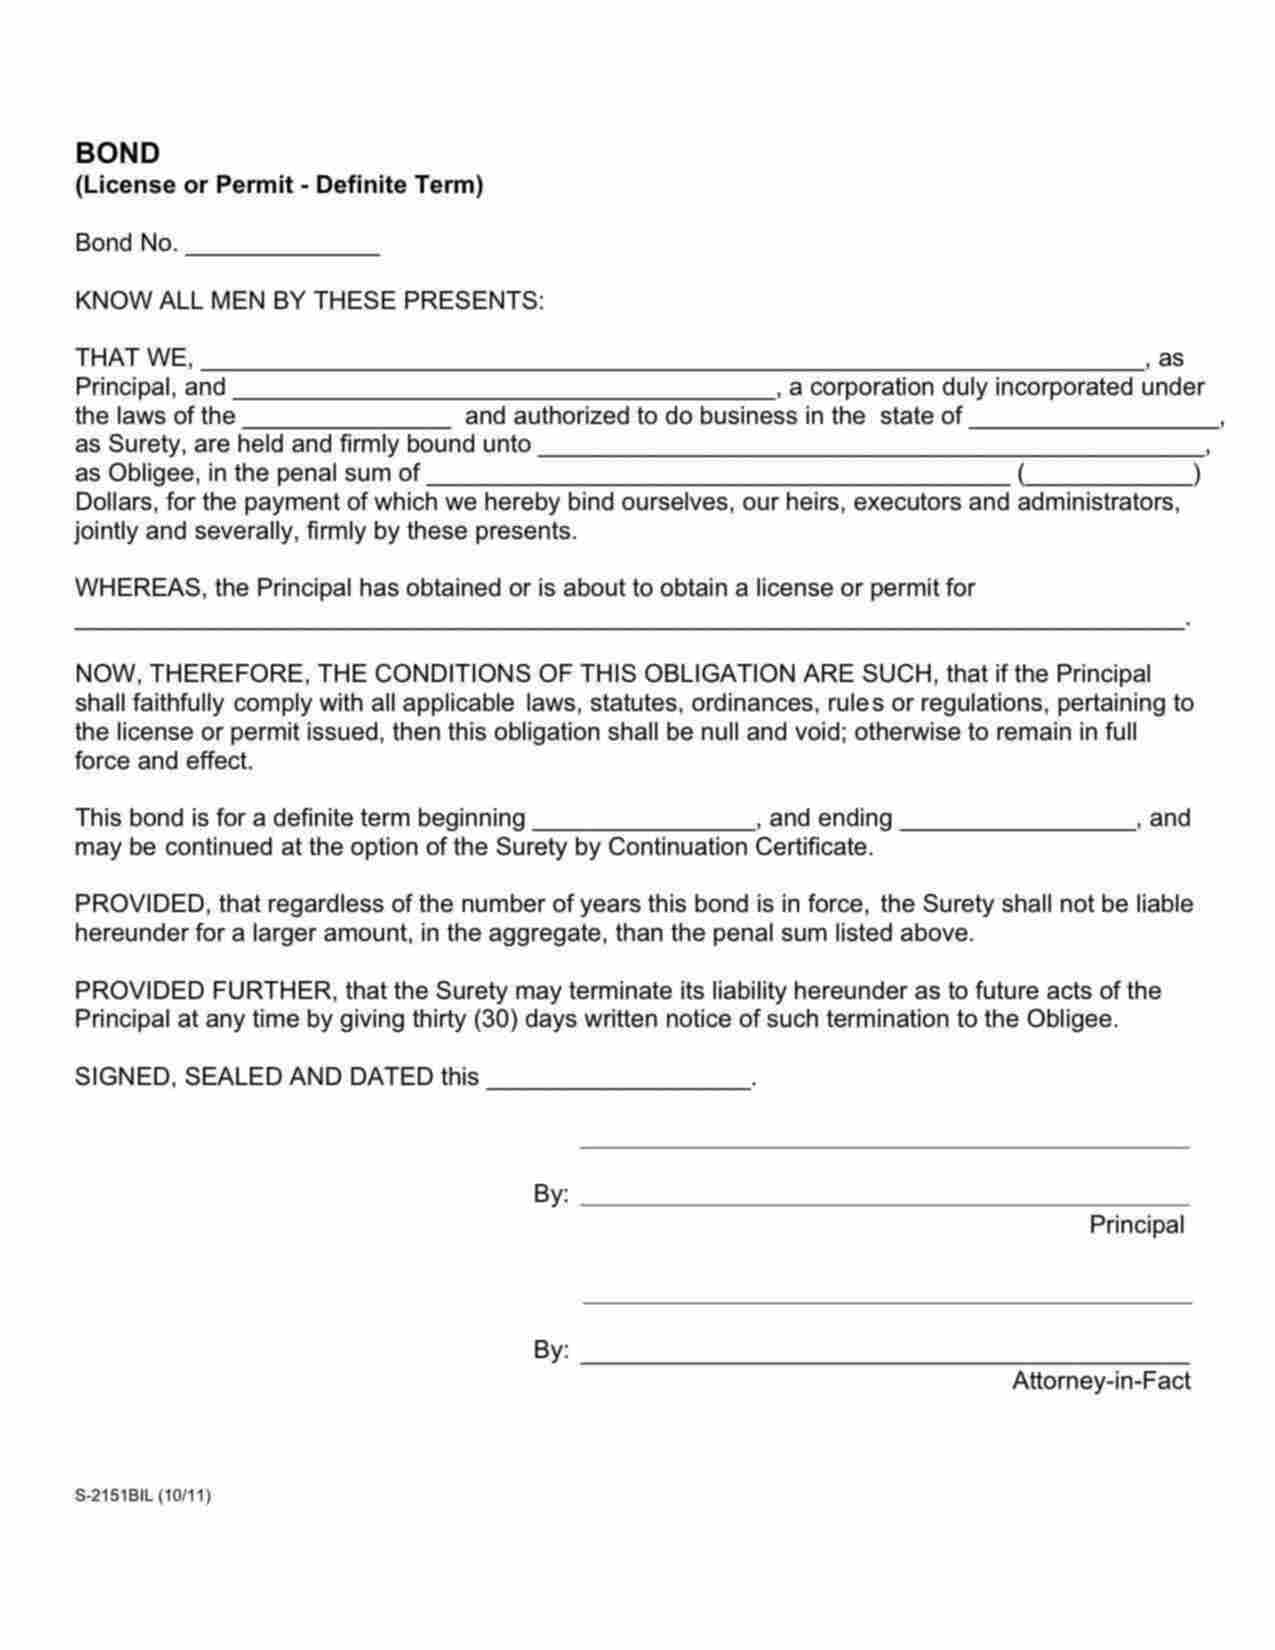 Ohio Electrical Contractor Bond Form